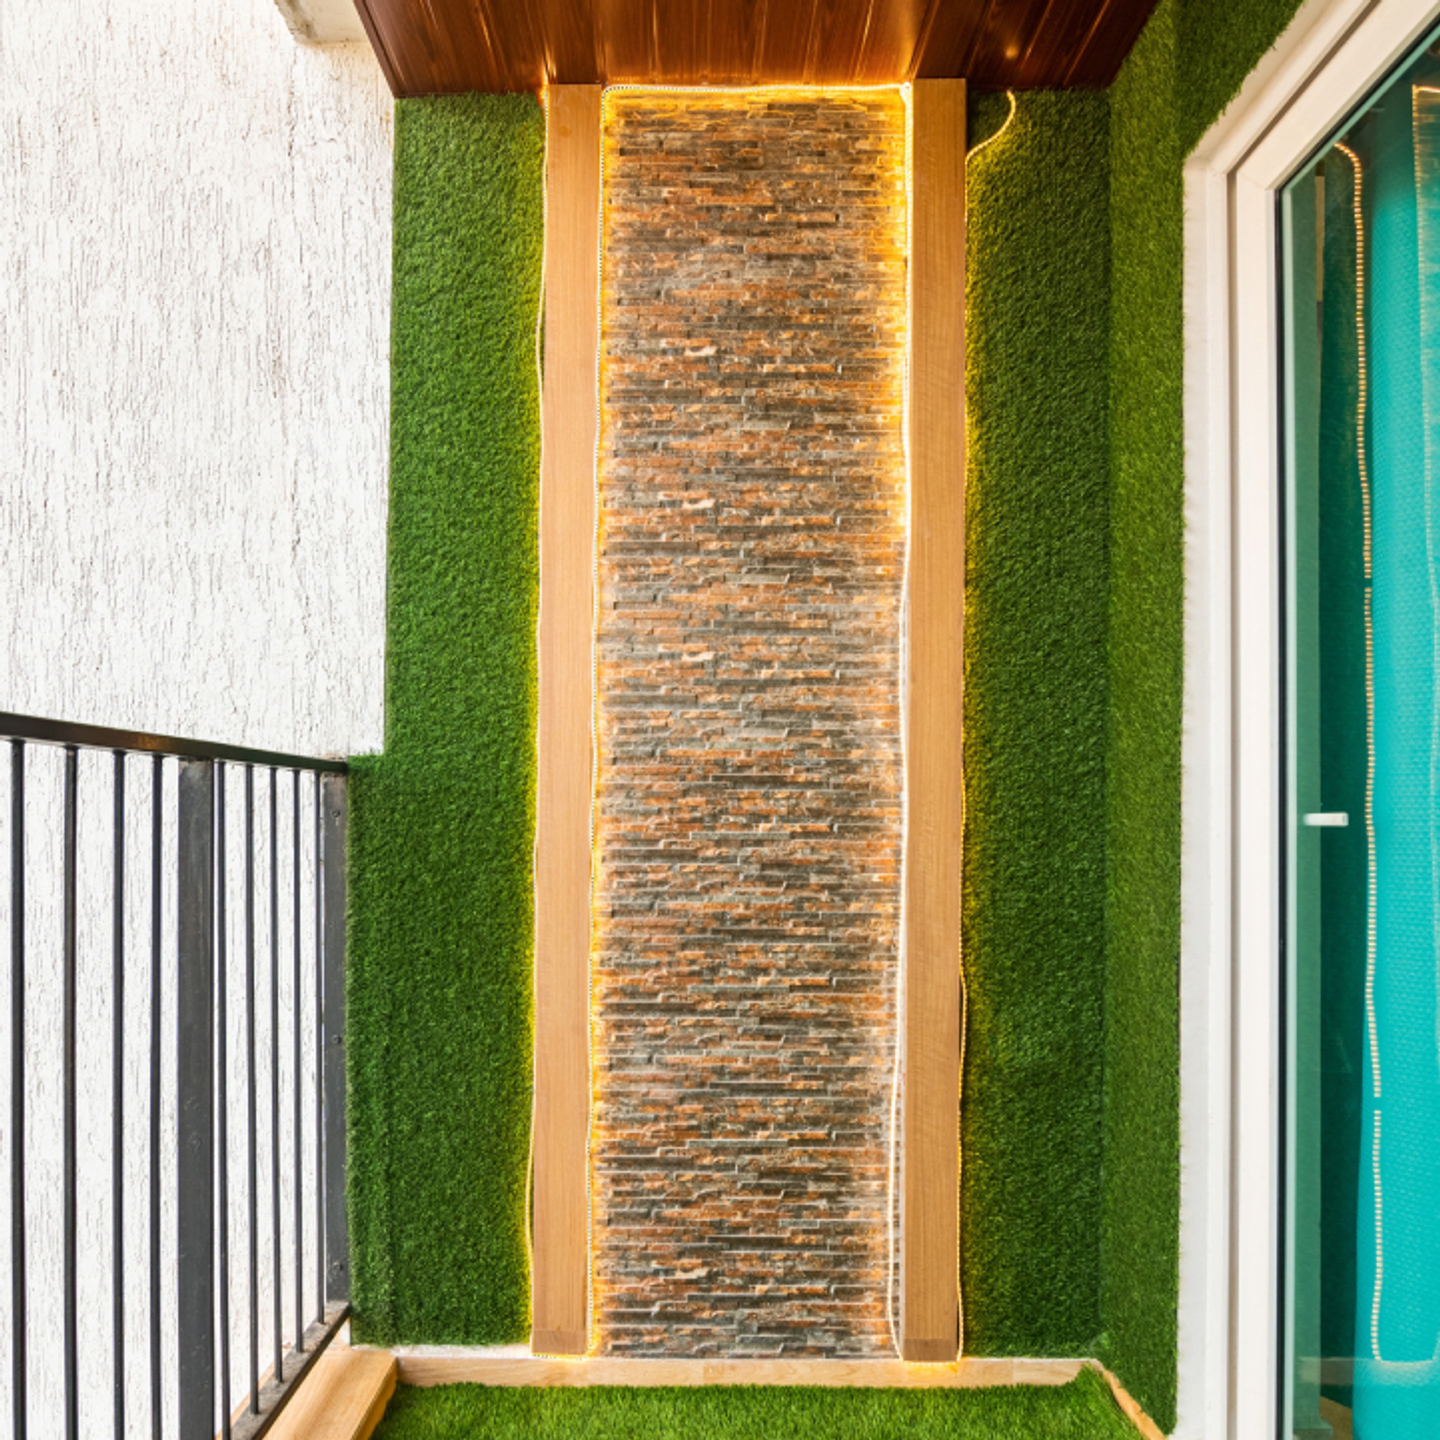 Balcony Design With Turf Grass And A Wooden Ceiling - Livspace